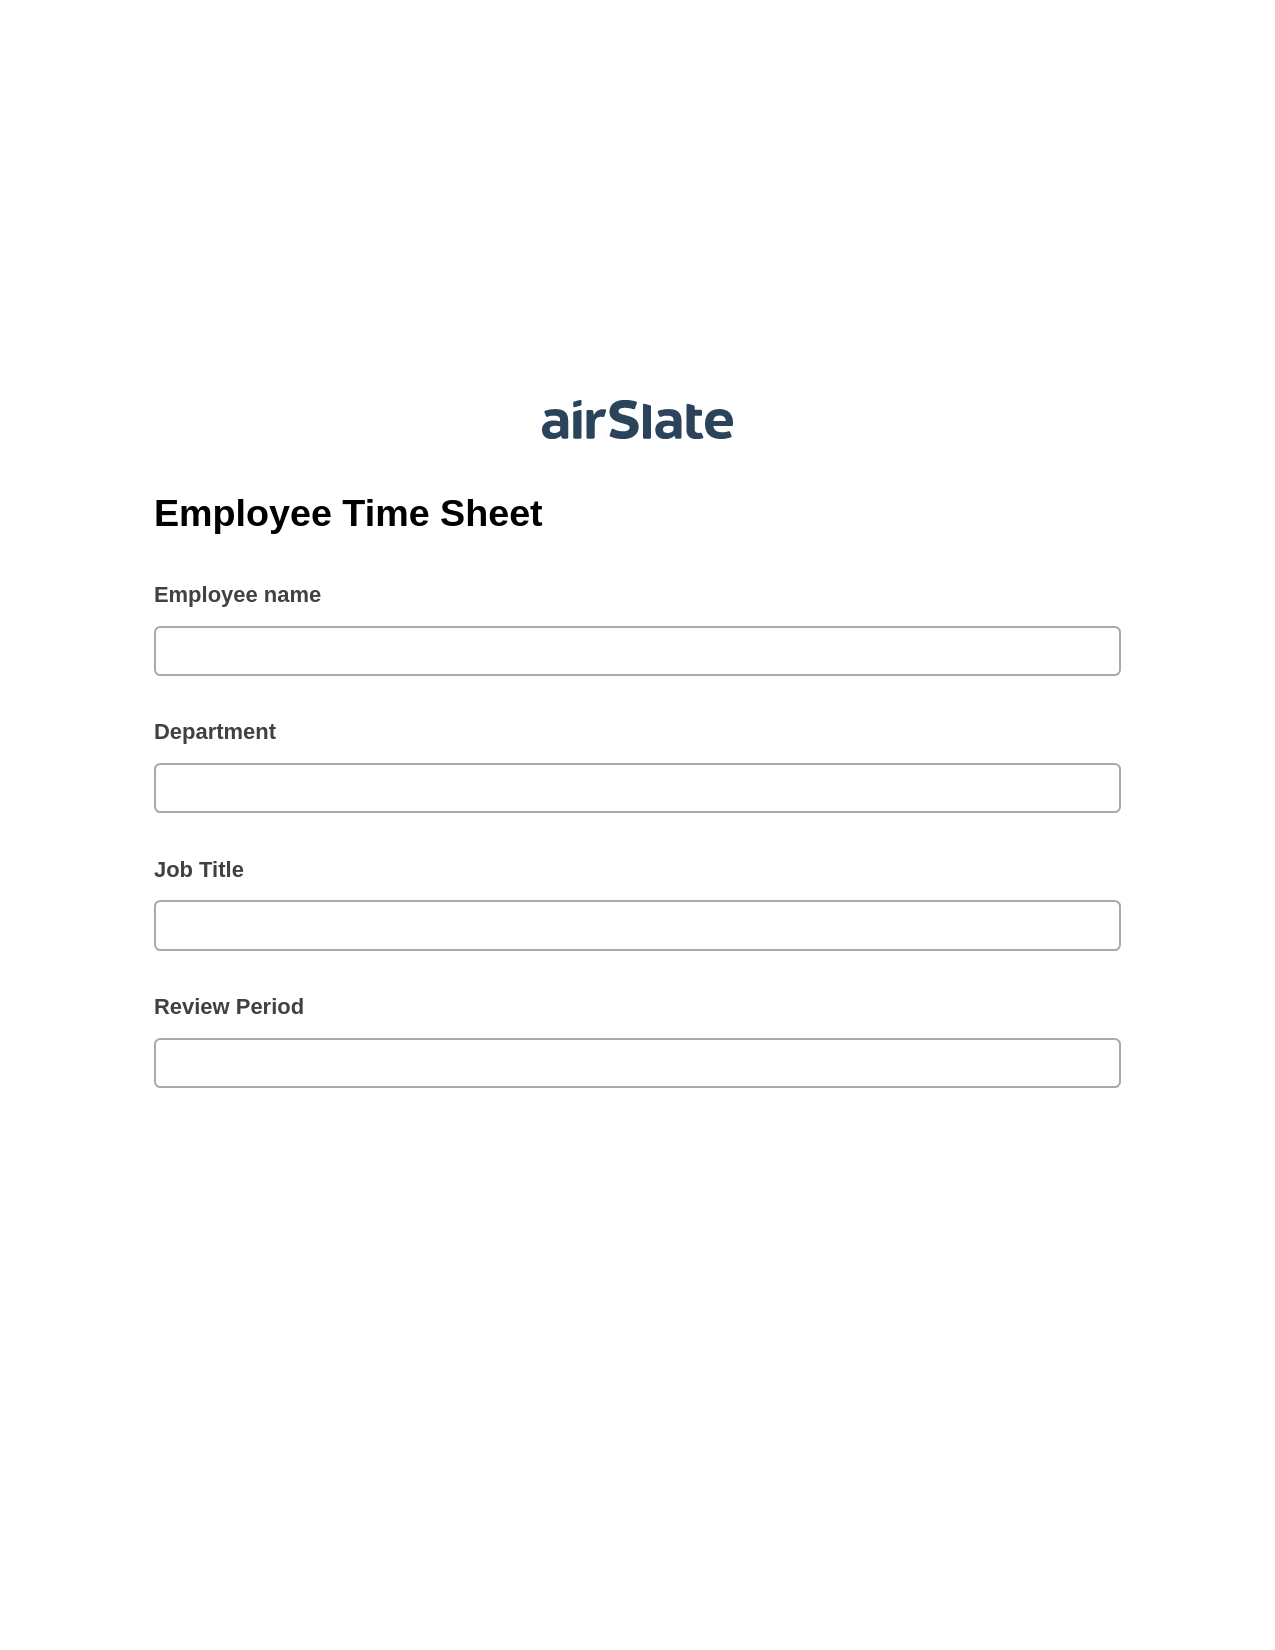 Employee Time Sheet Pre-fill from Google Sheets Bot, Create MS Dynamics 365 Records Bot, Export to Google Sheet Bot